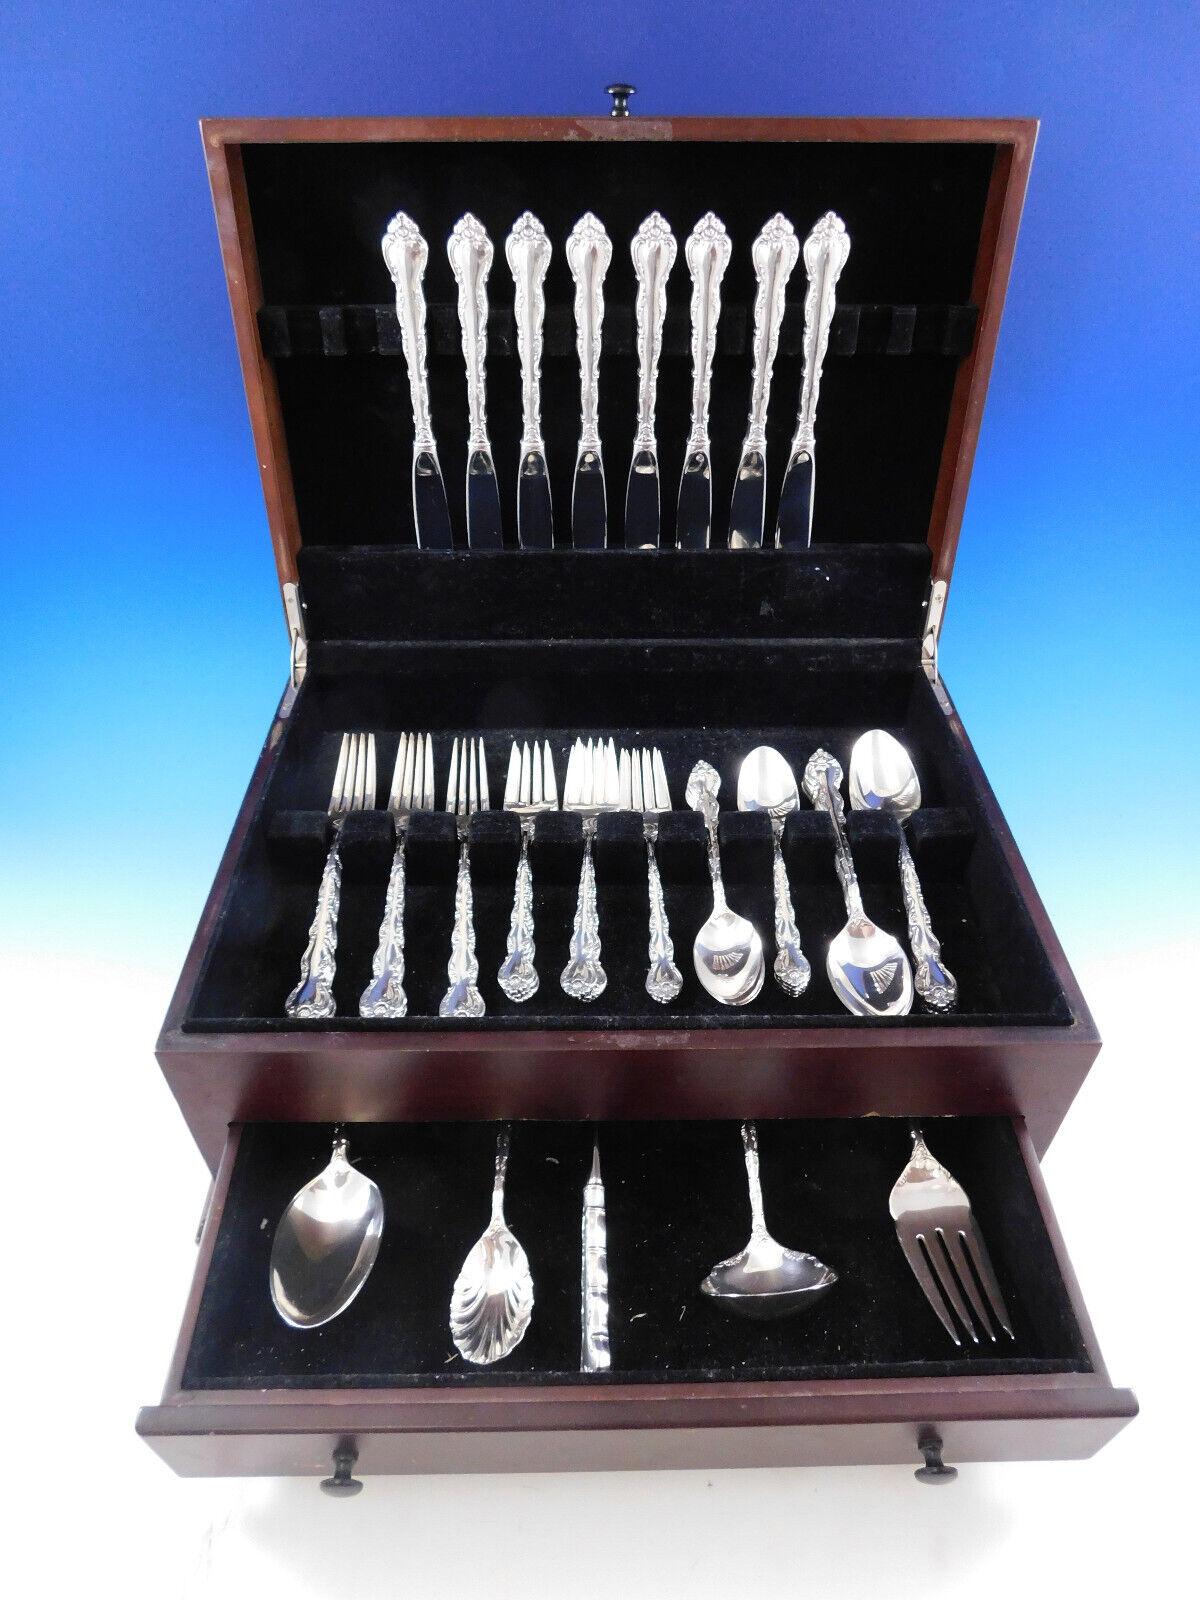 Stunning Feliciana by Wallace sterling silver Flatware set - 46 Pieces. This set includes:

8 Knives, 8 7/8